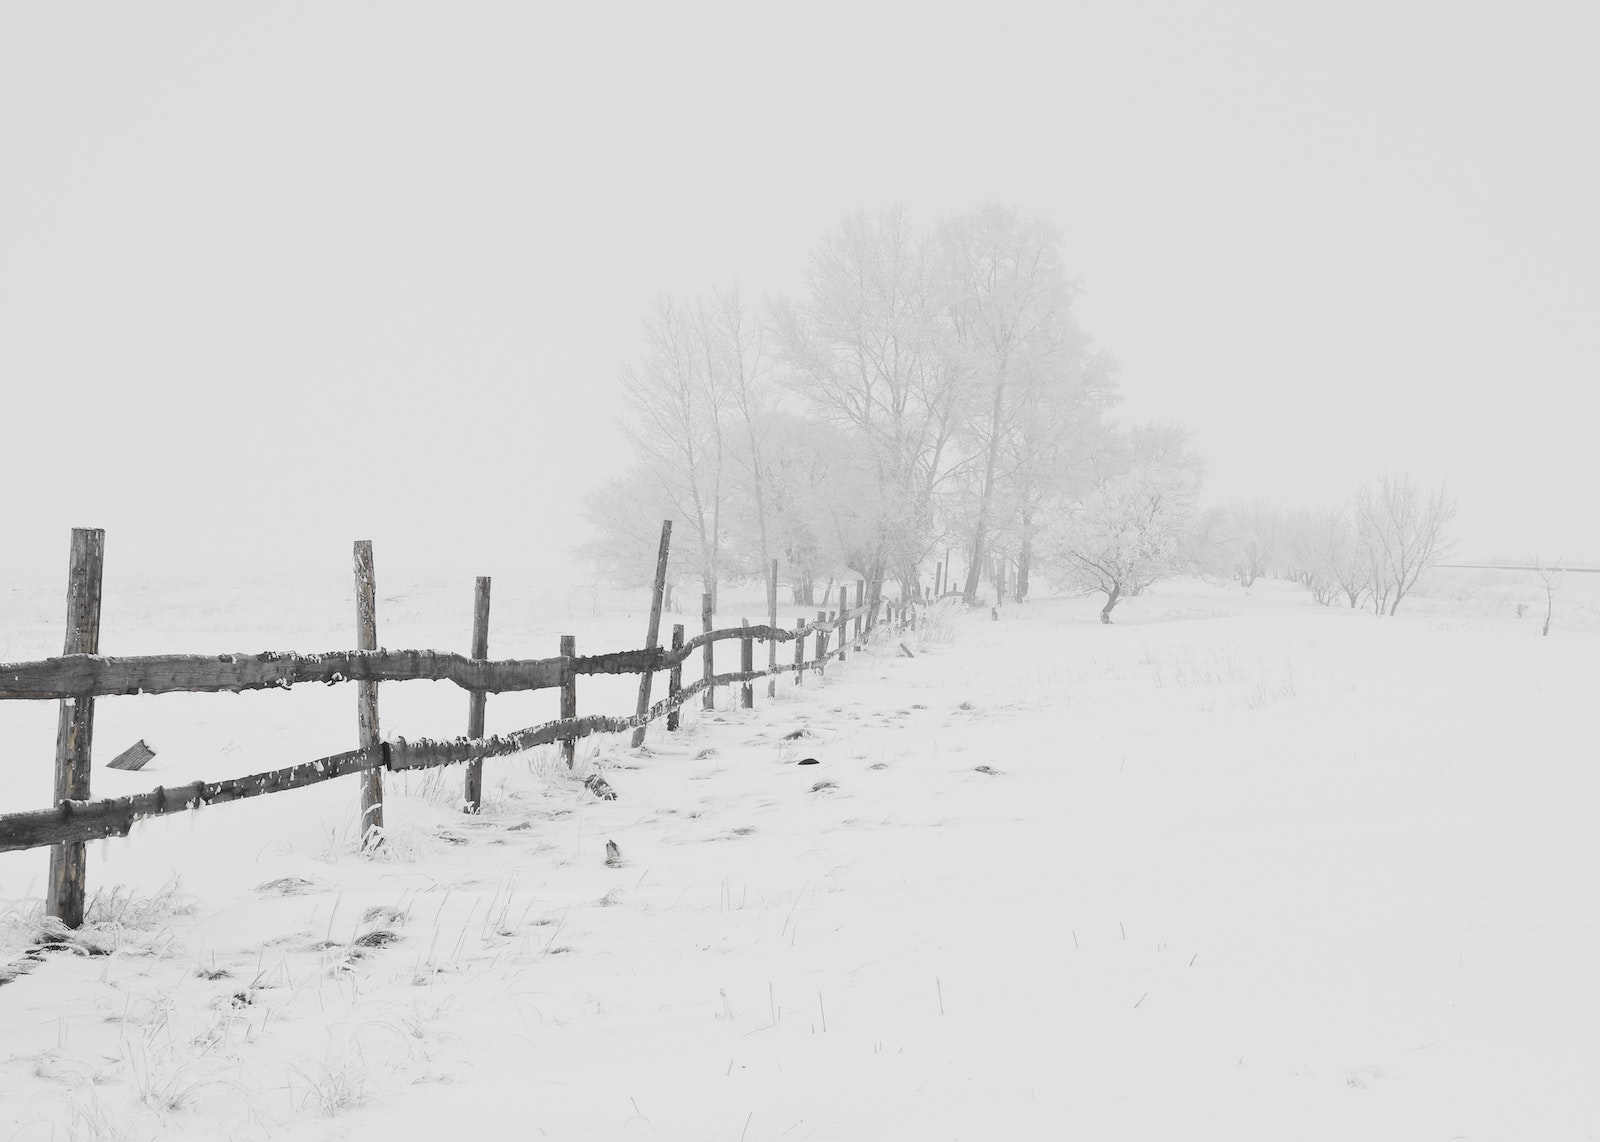 Black Wooden Fence on Snow Field at a Distance of Black Bare Trees